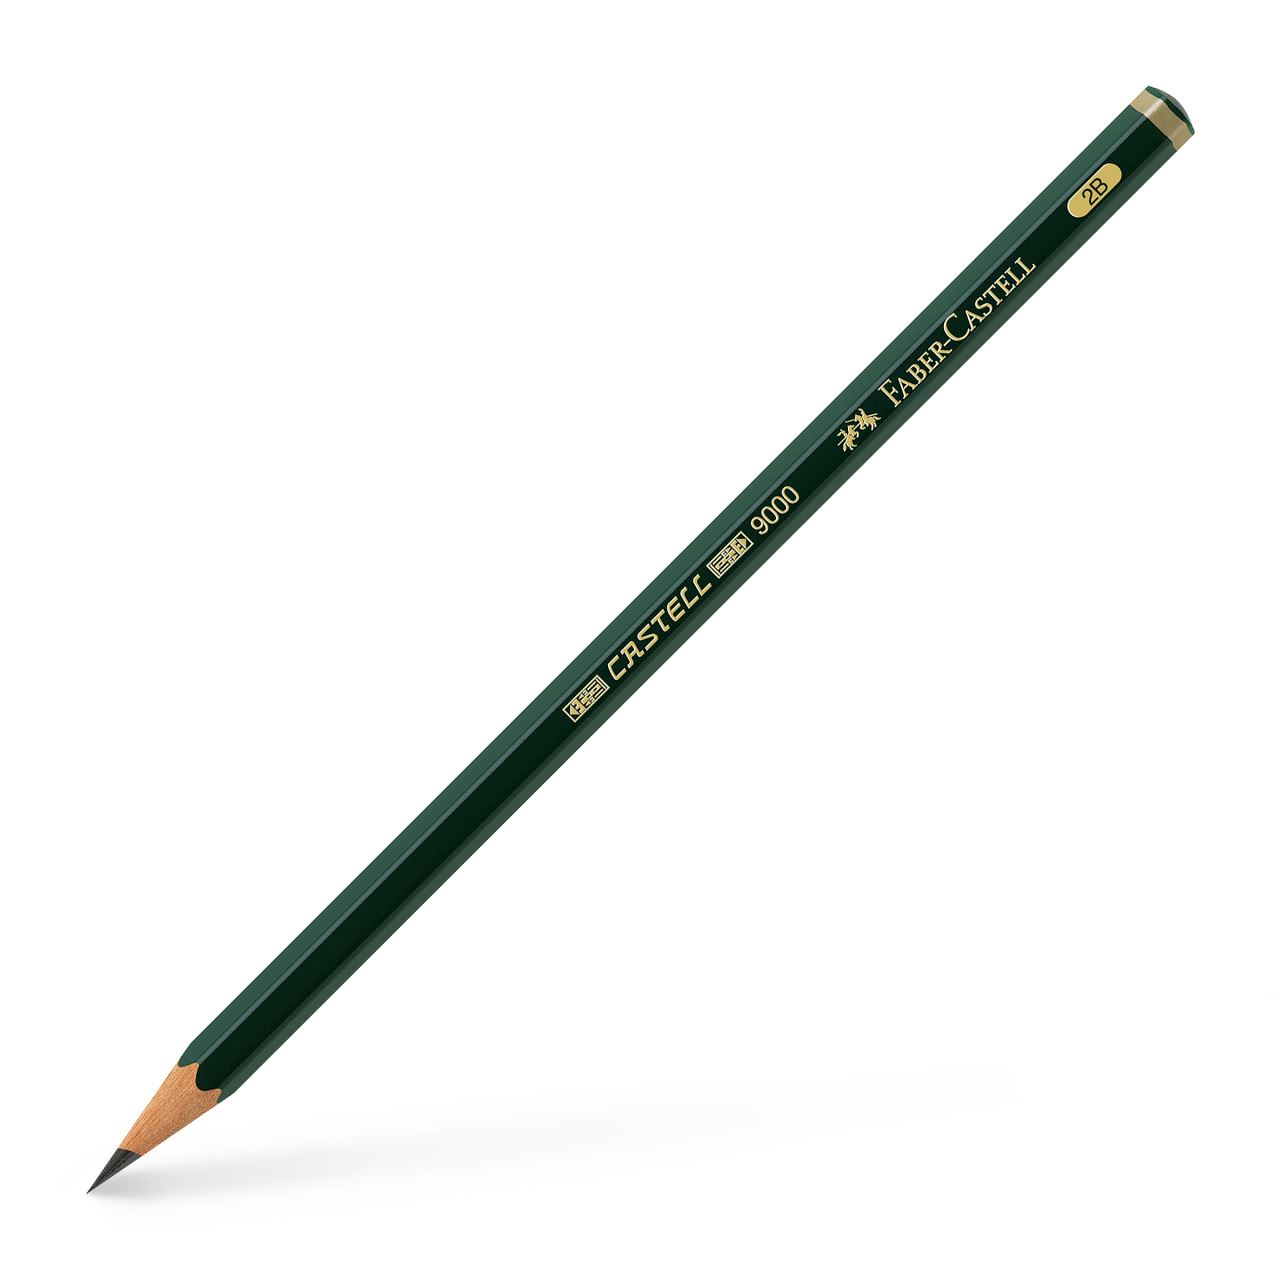 Faber-Castell - Crayon graphite Castell 9000 2B